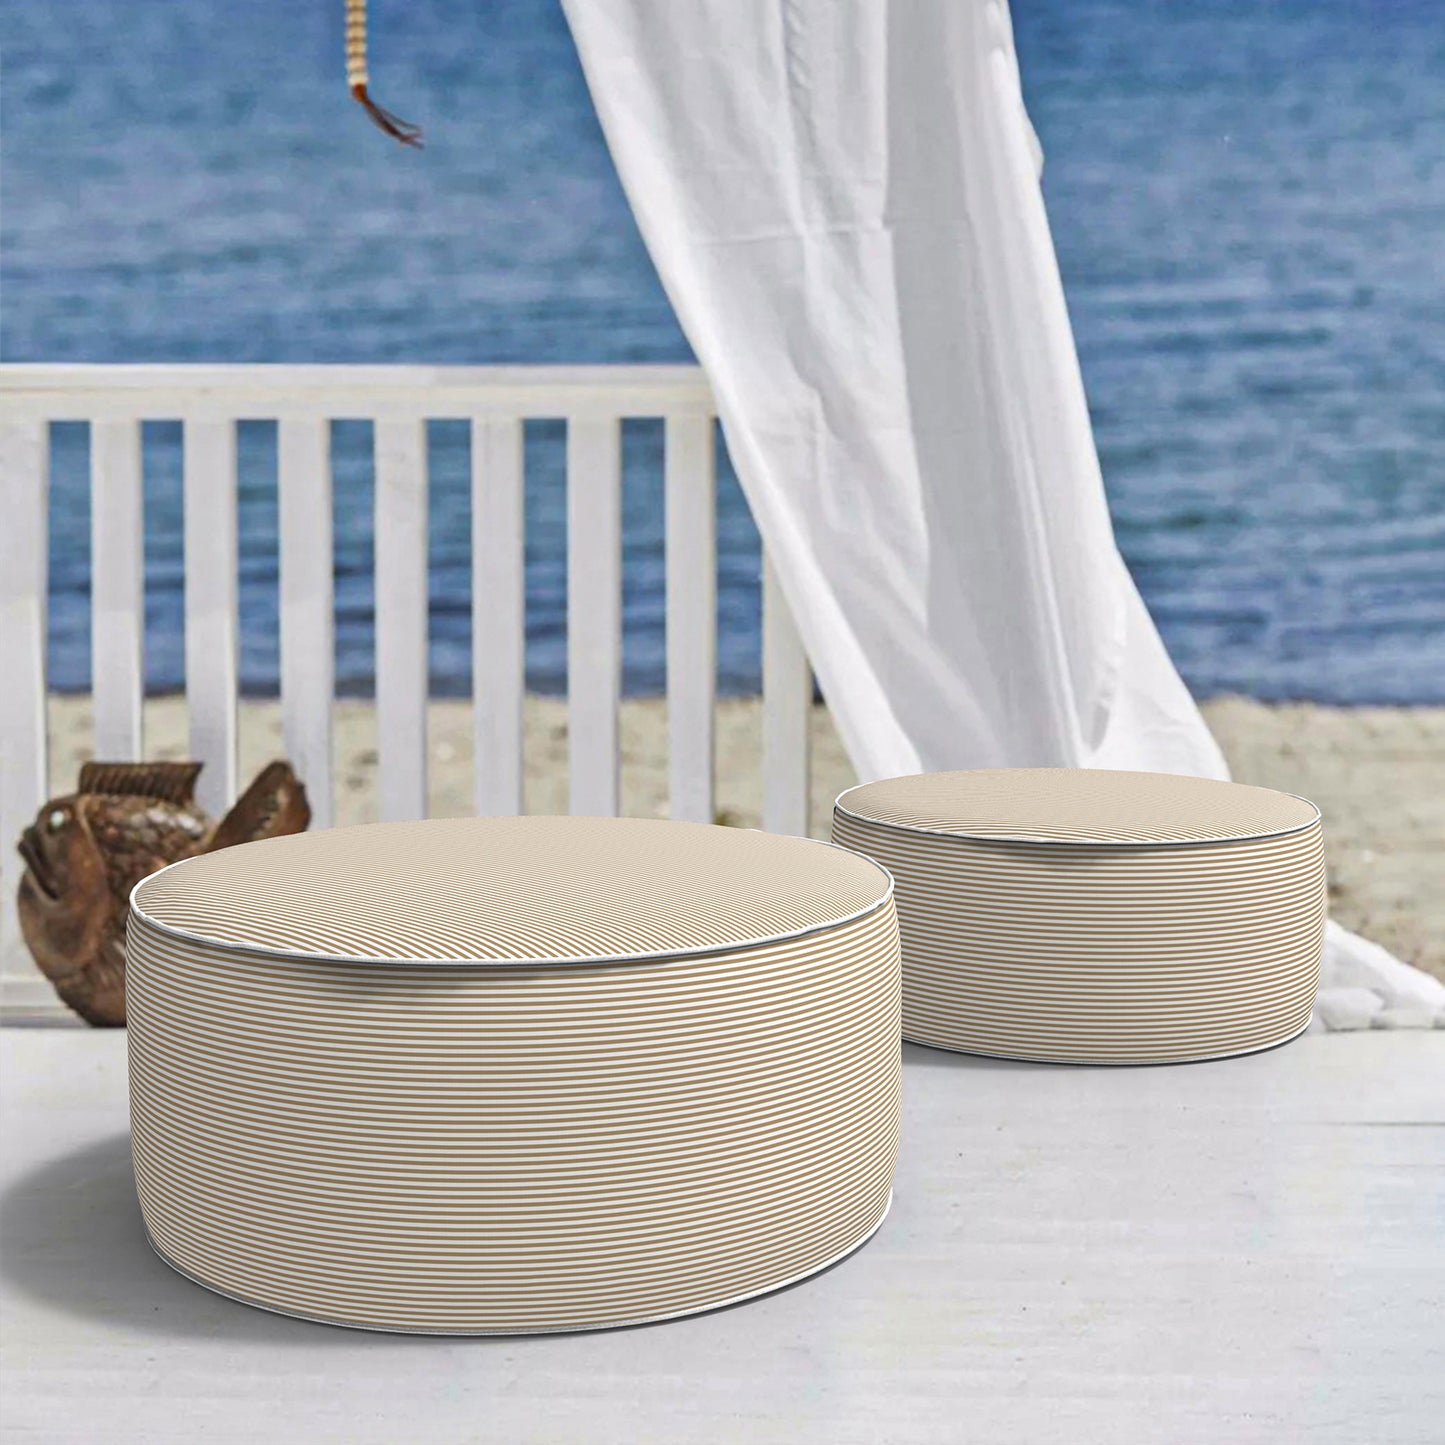 Outdoor Inflatable Stool Ottoman, All Weather Portable Footrest Stool, Furniture Stool Ottomans for Home Garden Beach, D31”xH14”, Stripe Beige